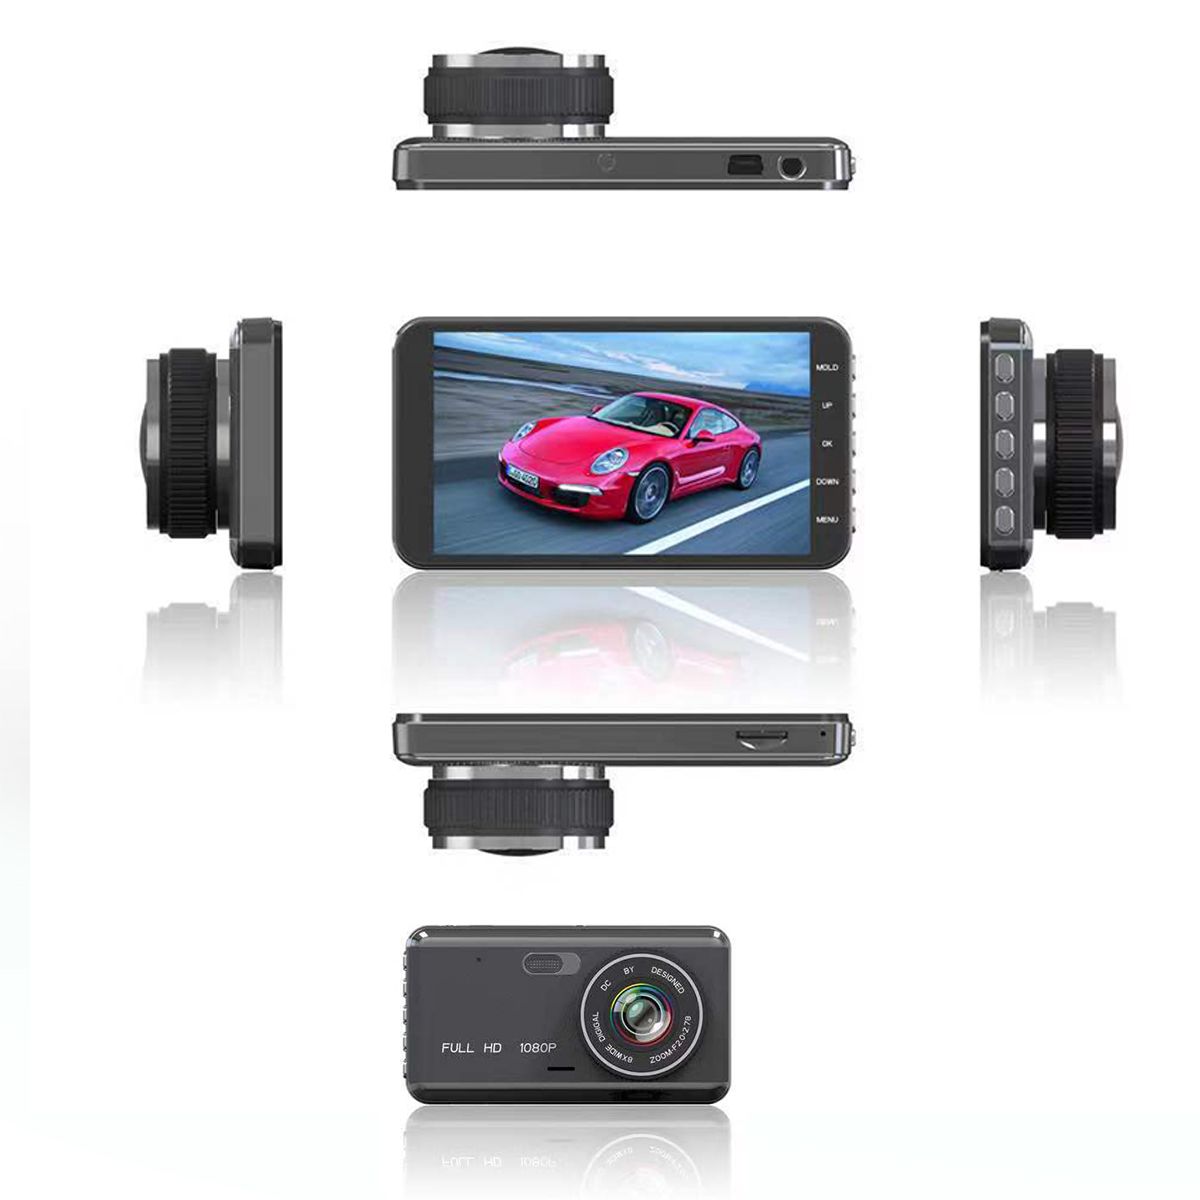 GT30-4-inch-1080P-Dual-Lens-Parking-Monitoring-170-Degree-Wide-Car-DVR-with-Rear-Camera-Recording-Dr-1532663